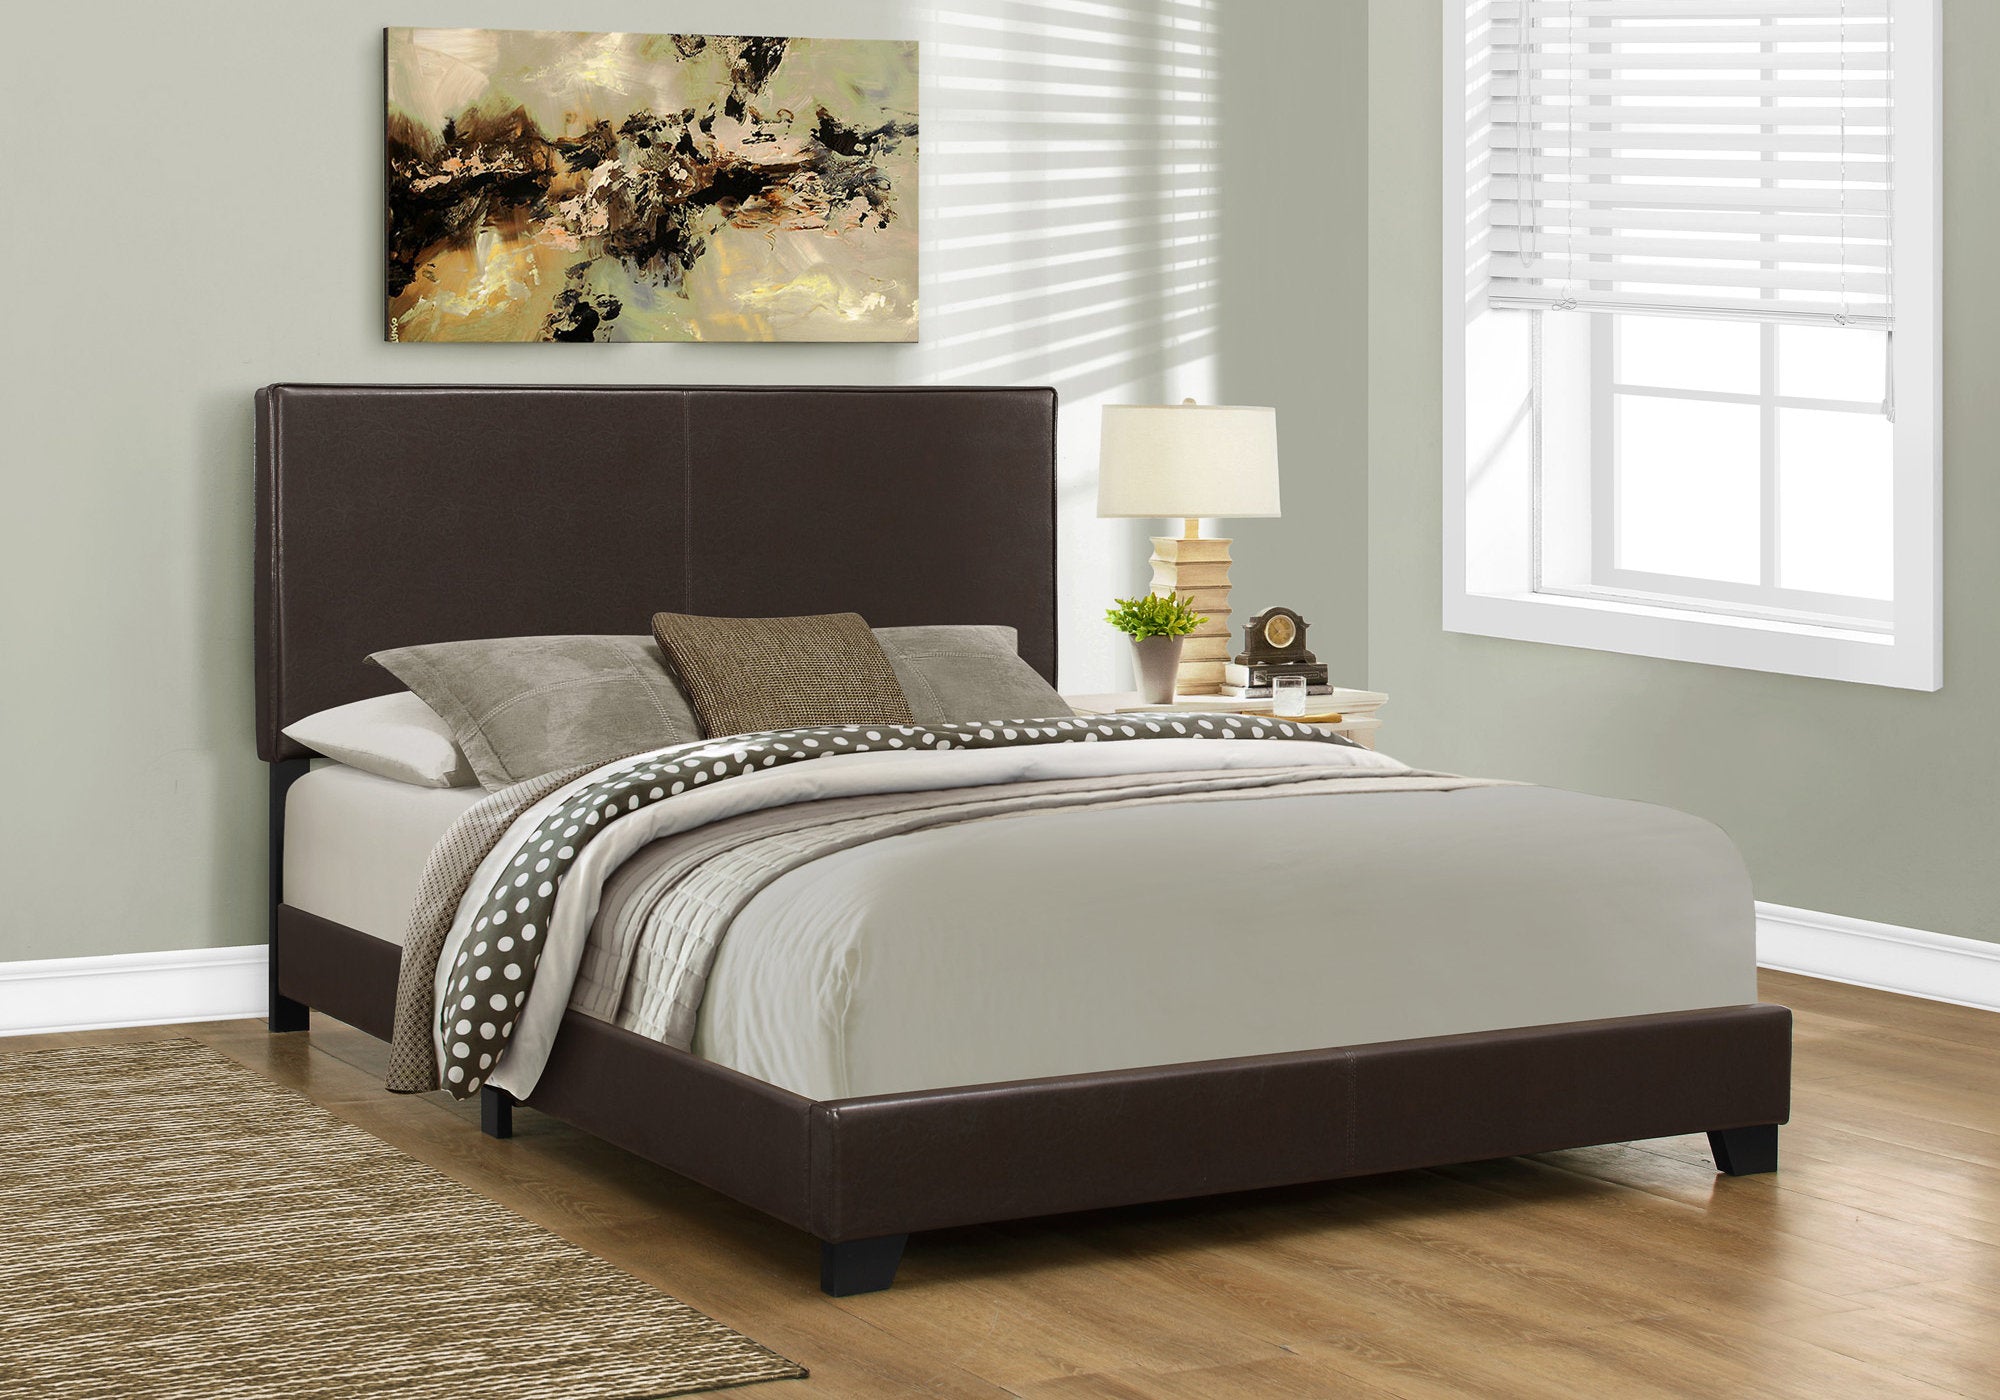 45.75" Solid Wood MDF and Foam Queen Size Bed with Leather Look